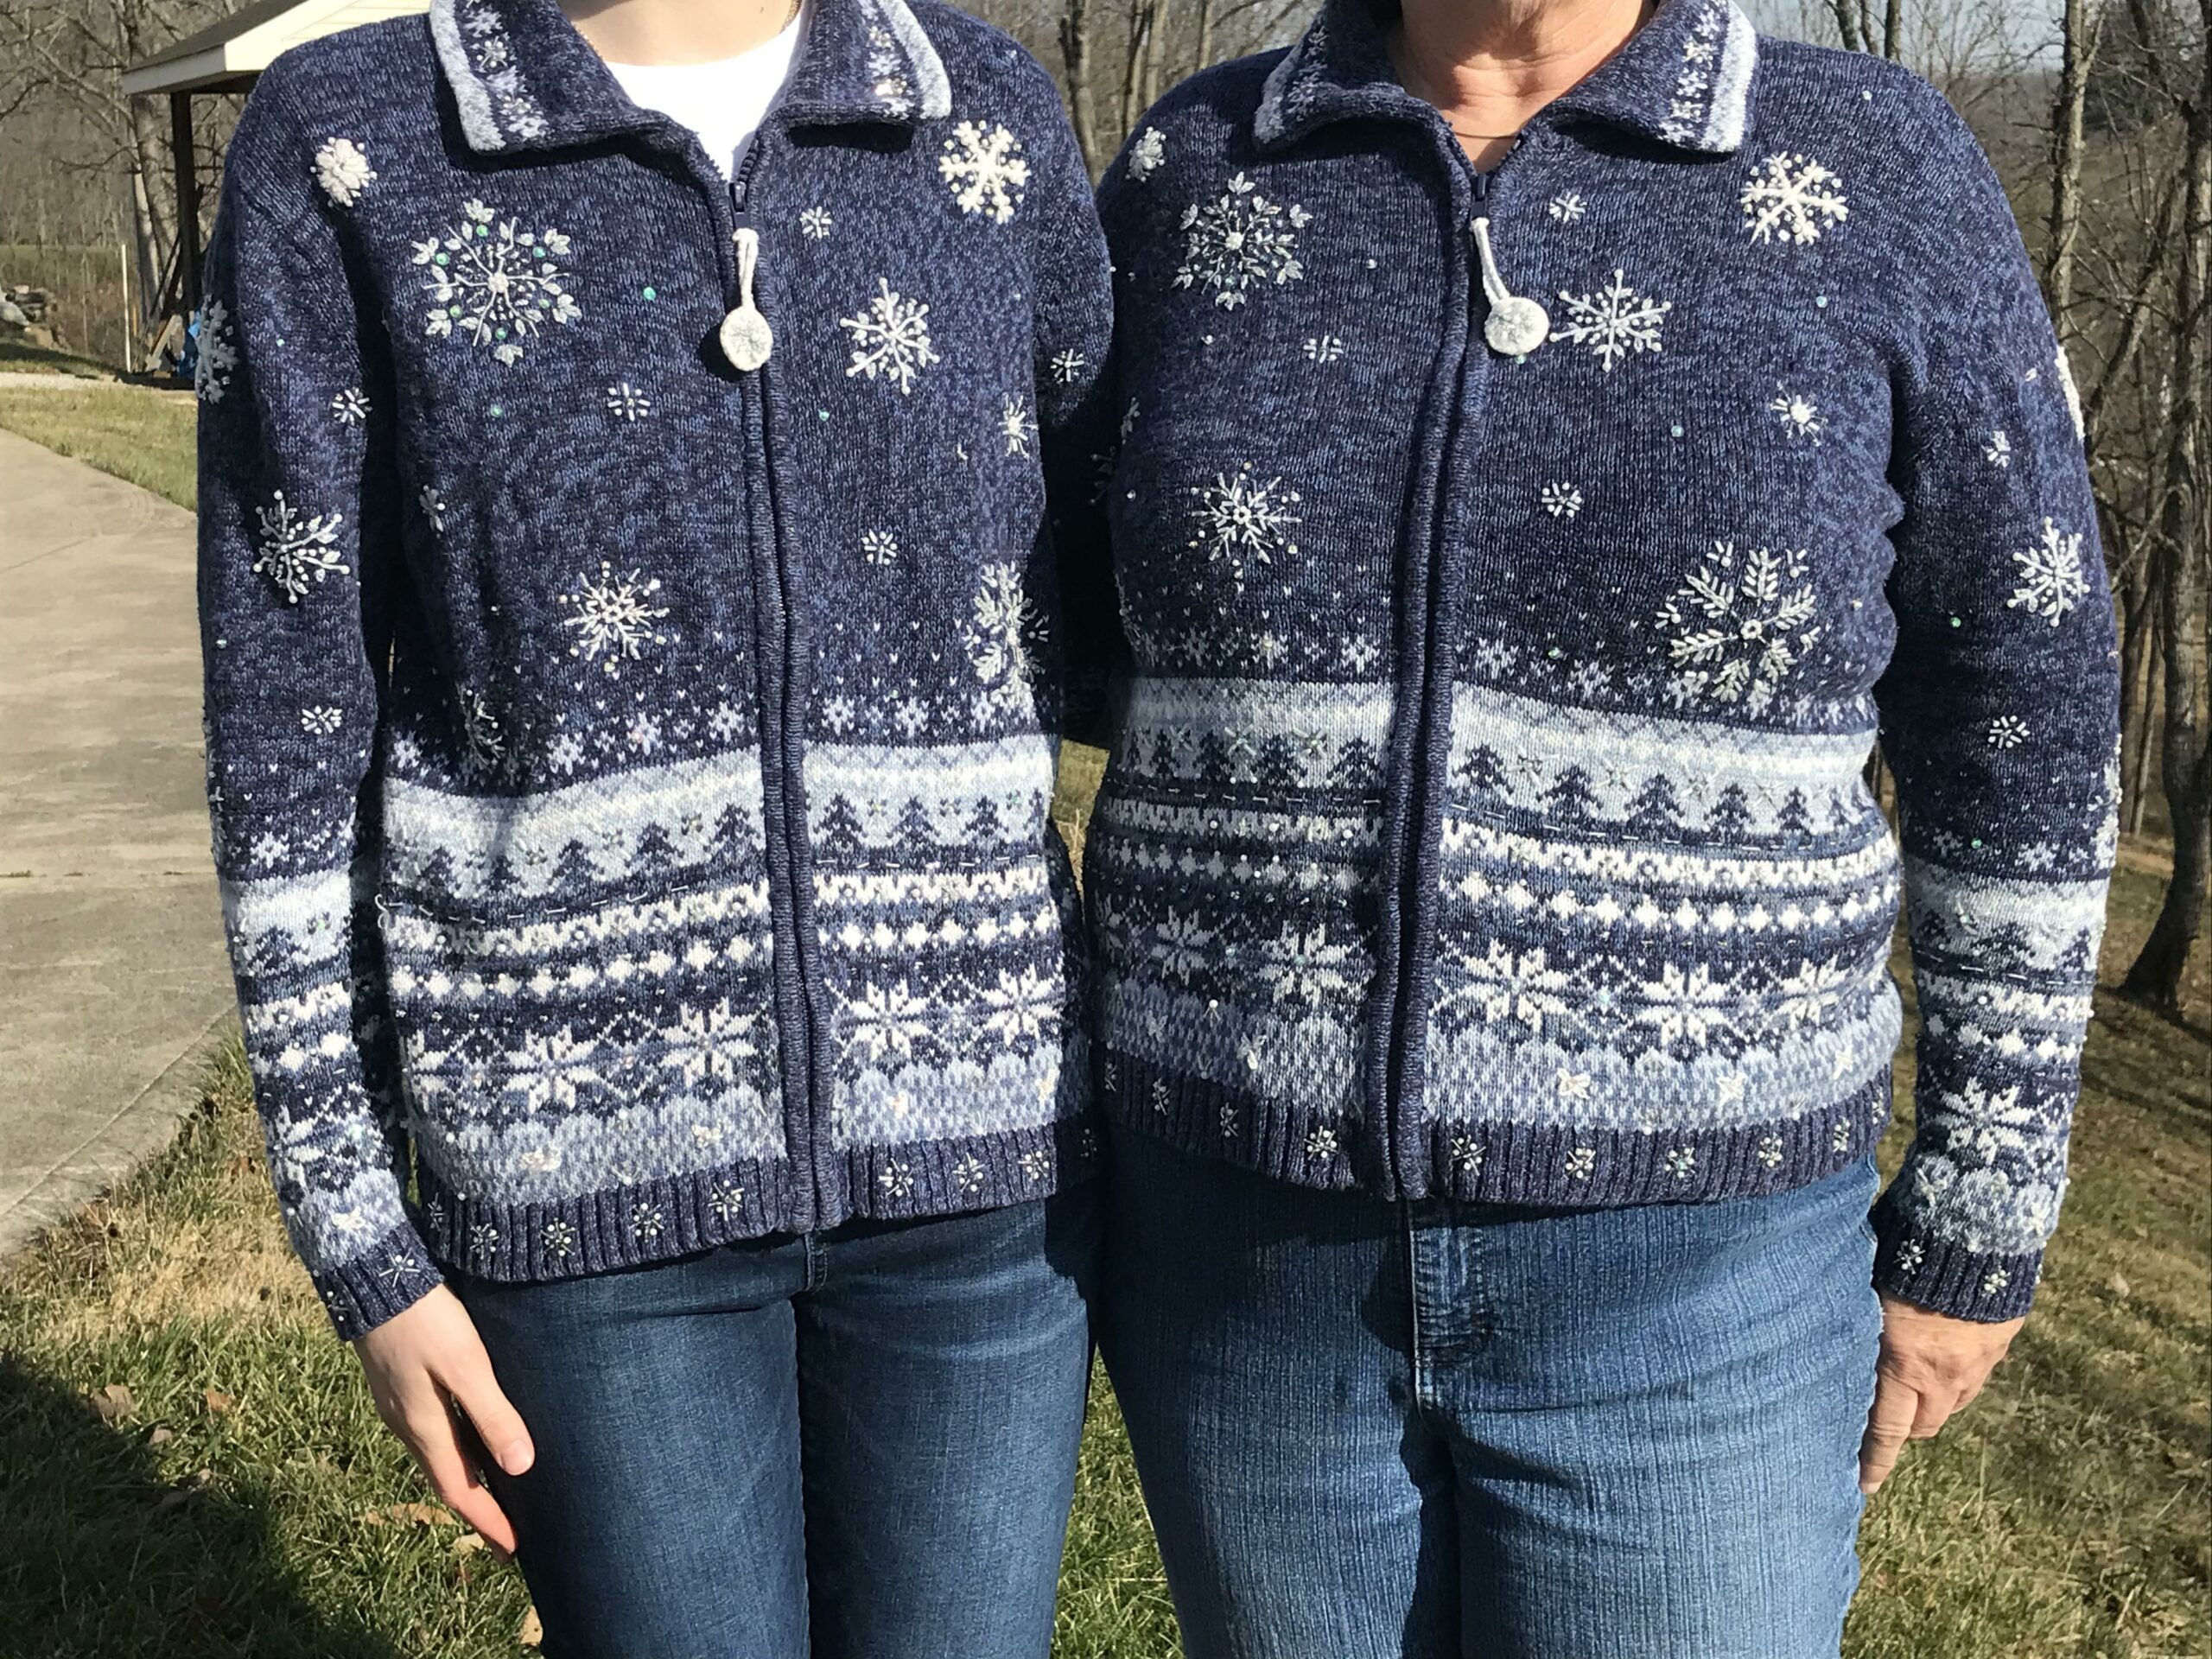 a mother and daughter posing together while wearing identical sweaters with snowflakes on them